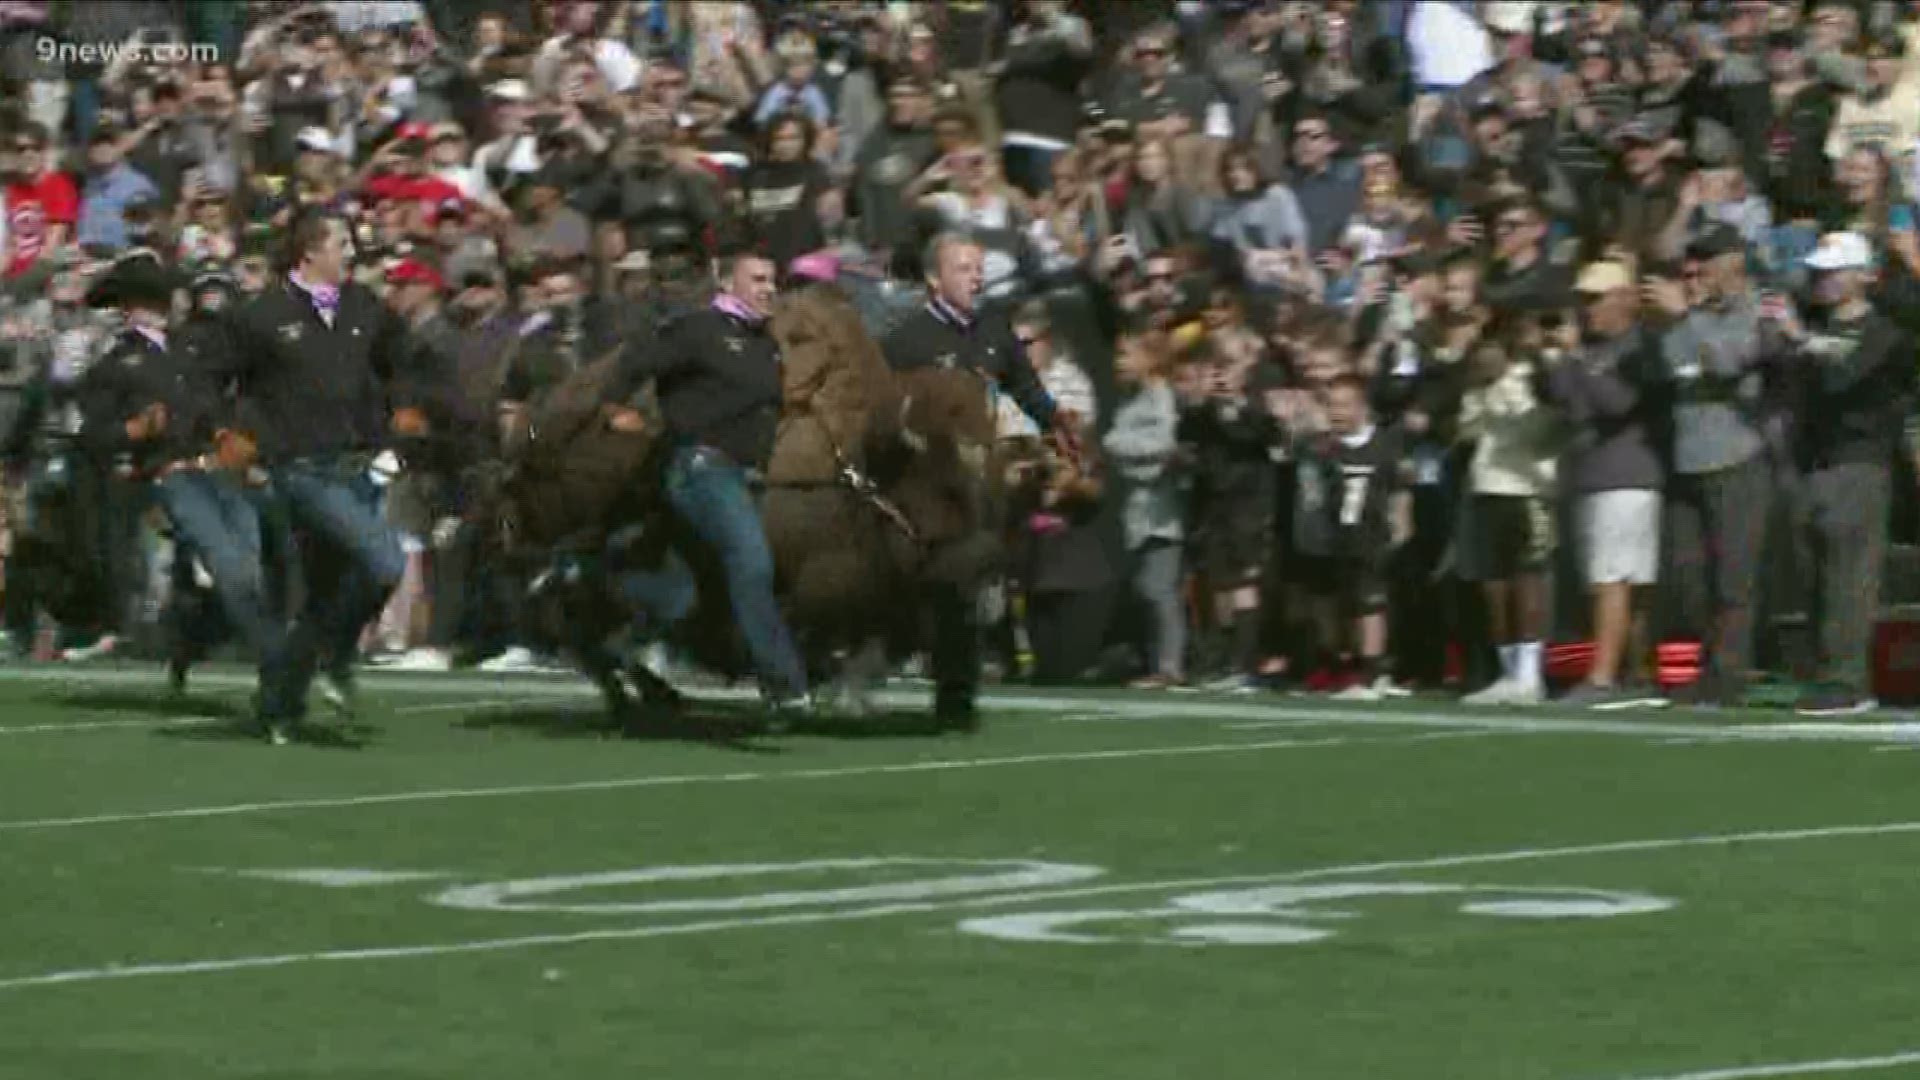 The university said Ralphie will make her final appearance as a spectator at CU's home game against Washington on Nov. 23.